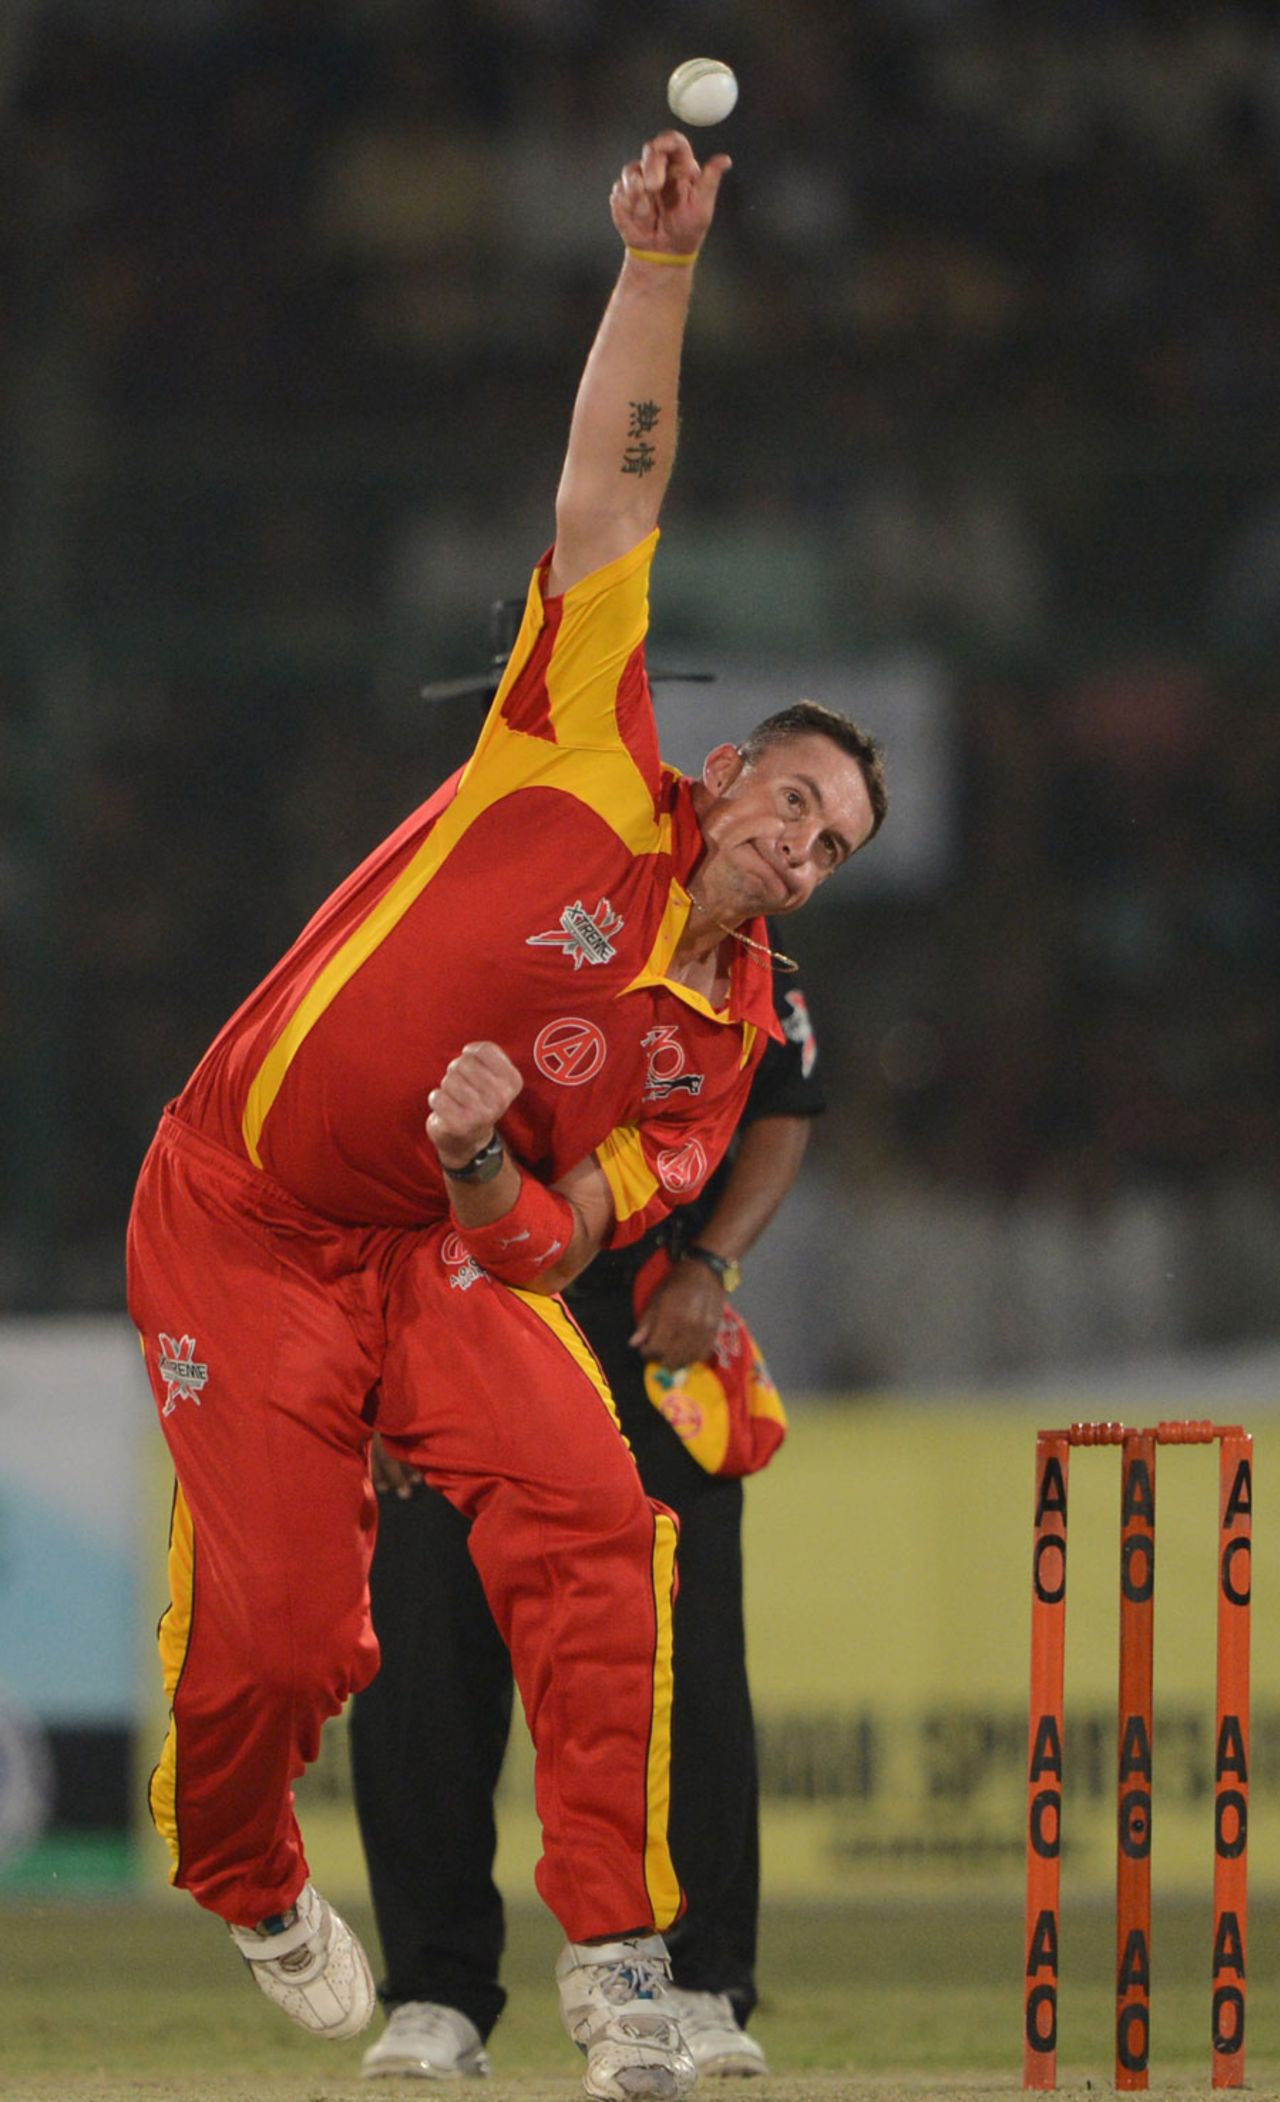 Andre Nel conceded 41 in his four overs, Pakistan All Star XI v International XI, Karachi, October 20, 2012